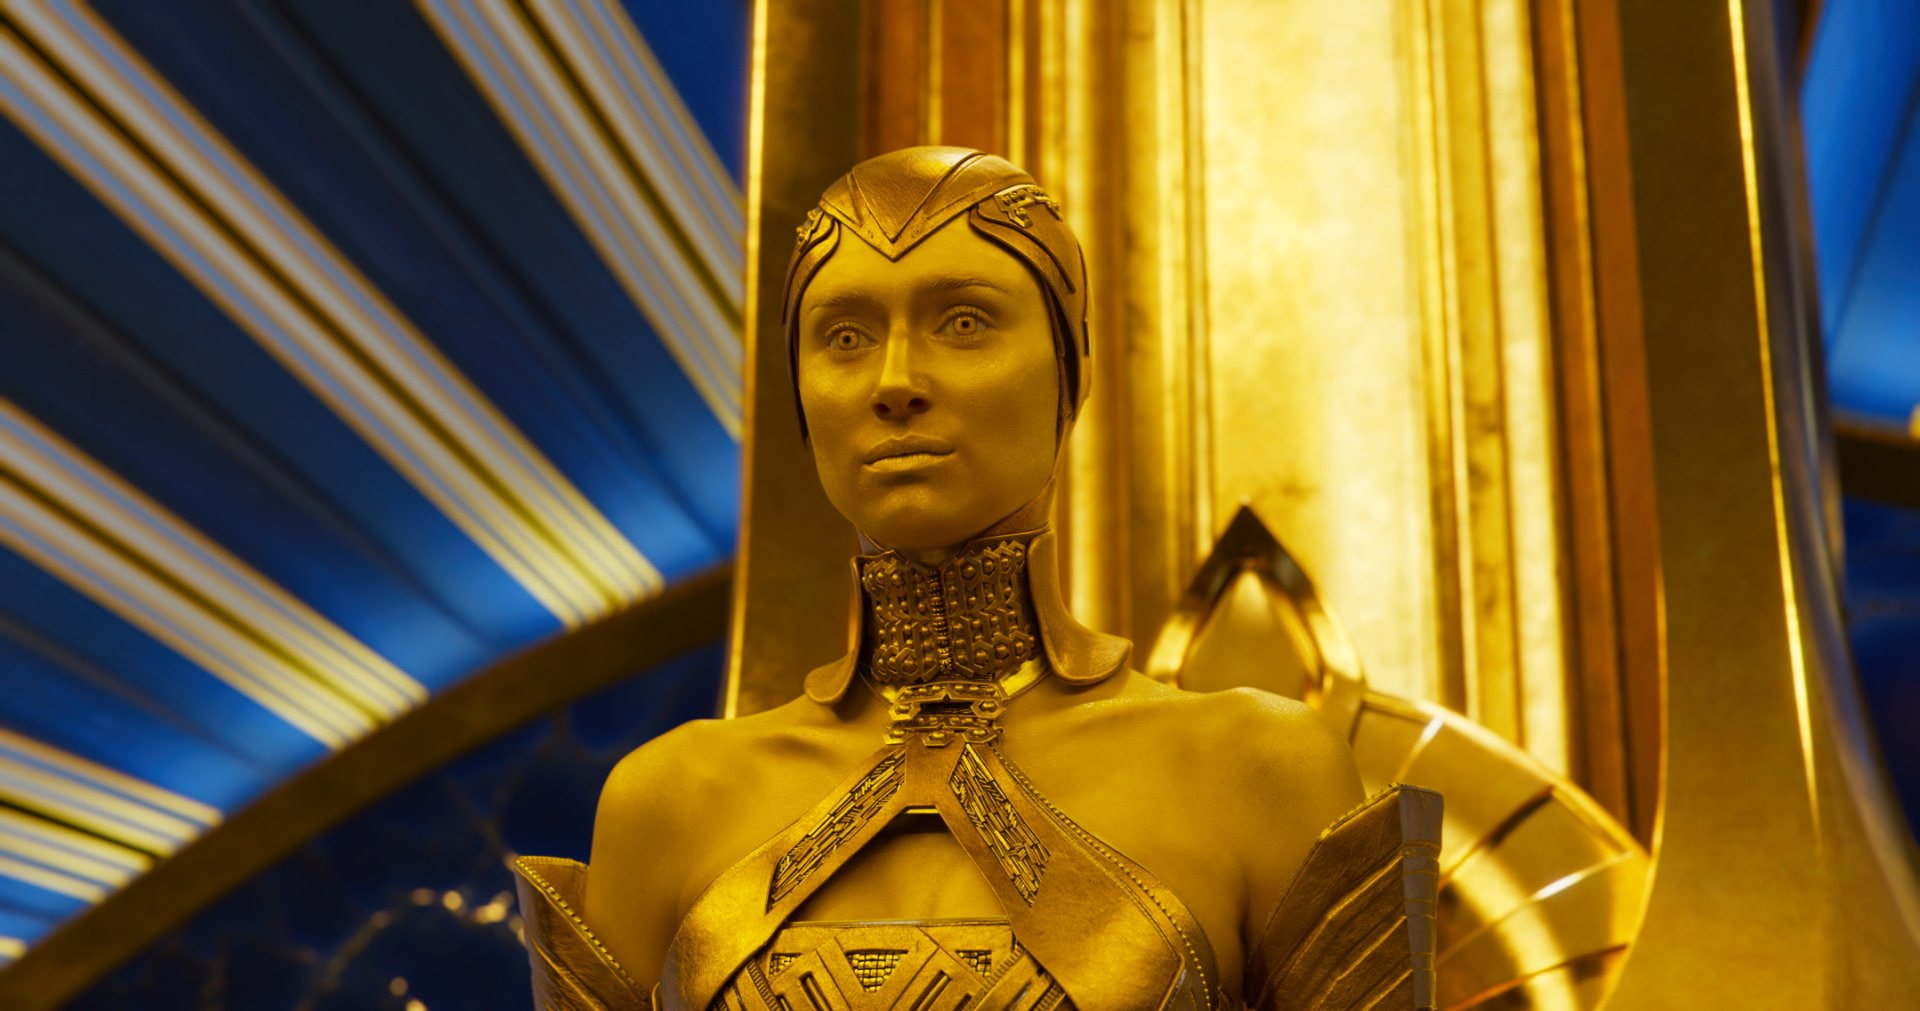 Movie, Guardians of the Galaxy Vol. 2, Ayesha (Guardians Of The Galaxy)